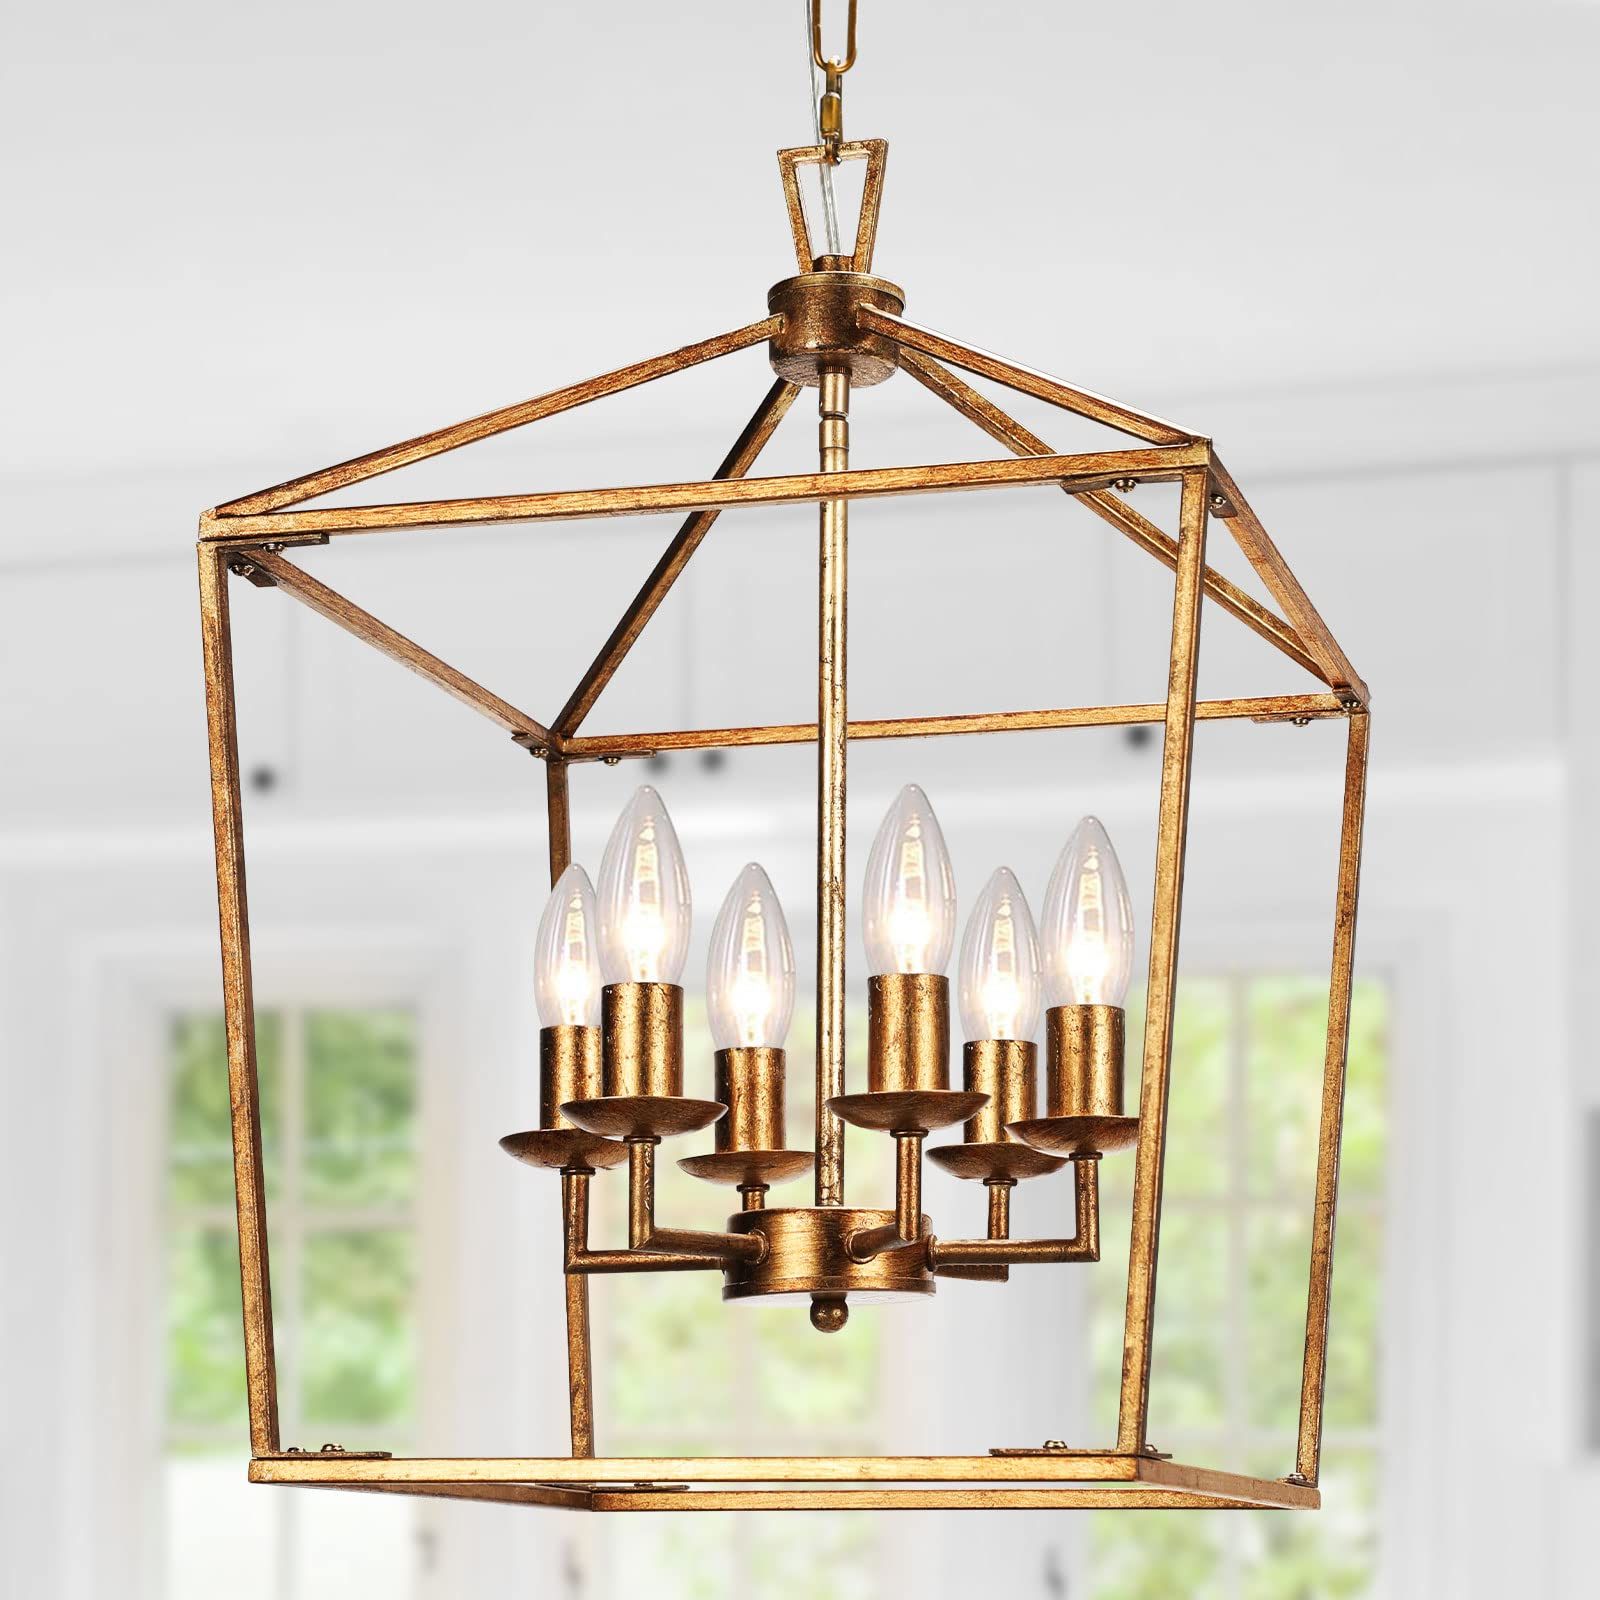 Widely Used Gold Leaf Lantern Chandeliers Regarding Gold Chandelier Lantern Light Fixtures – 6 Light Retro Foyer Pendant Light,  Rustic Pendant Lighting For Kitchen Island, Hang Lighting With Adjustable  Chain, Hand Pasted Gold Foil Finish – – Amazon (View 6 of 10)